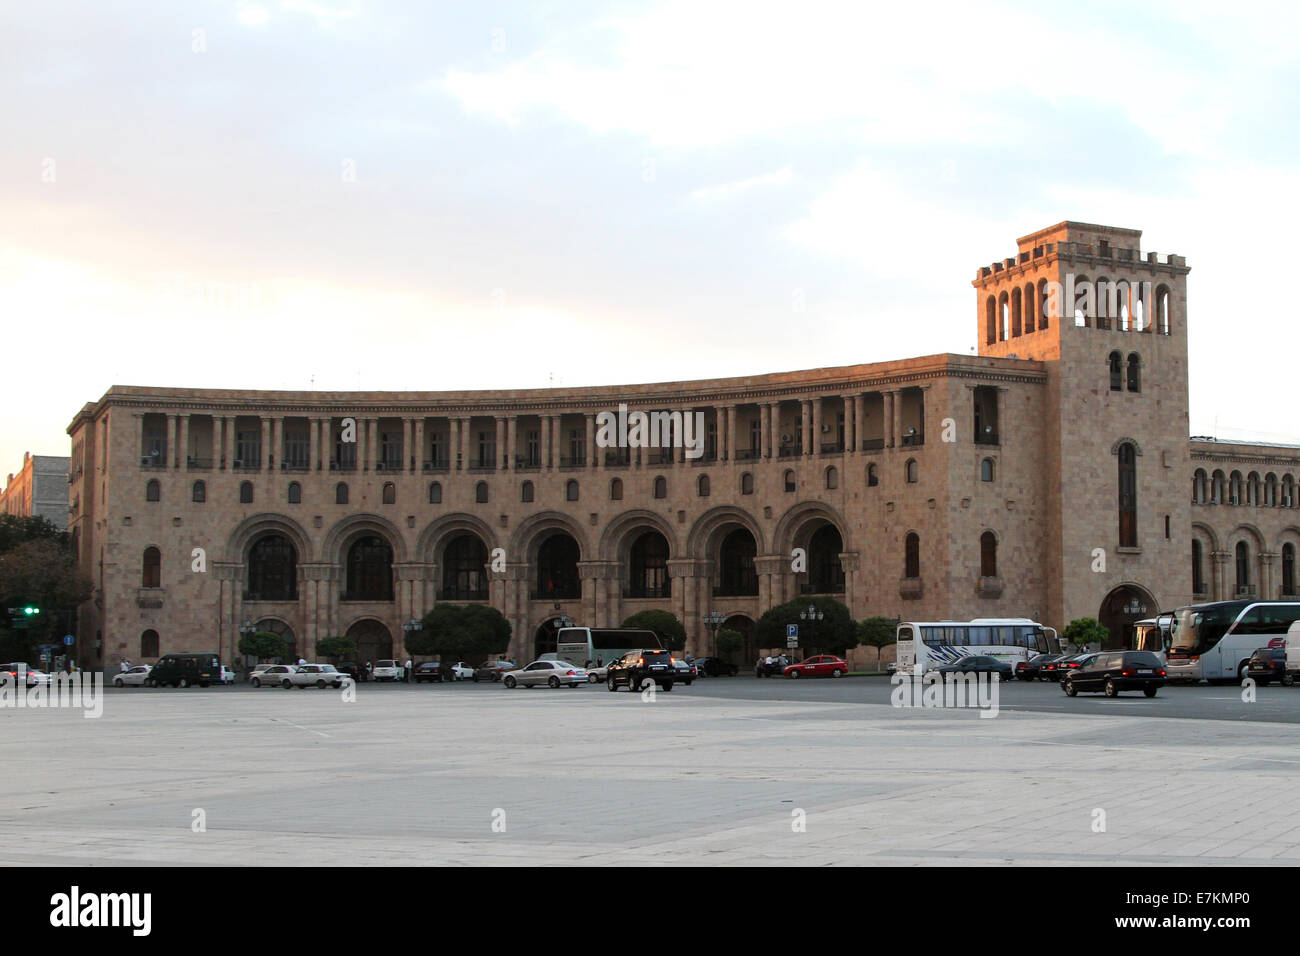 The Ministry of Foreign Affairs on Republic Square in central Yerevan, Armenia as photographed on Monday, 15 September 2014. Stock Photo